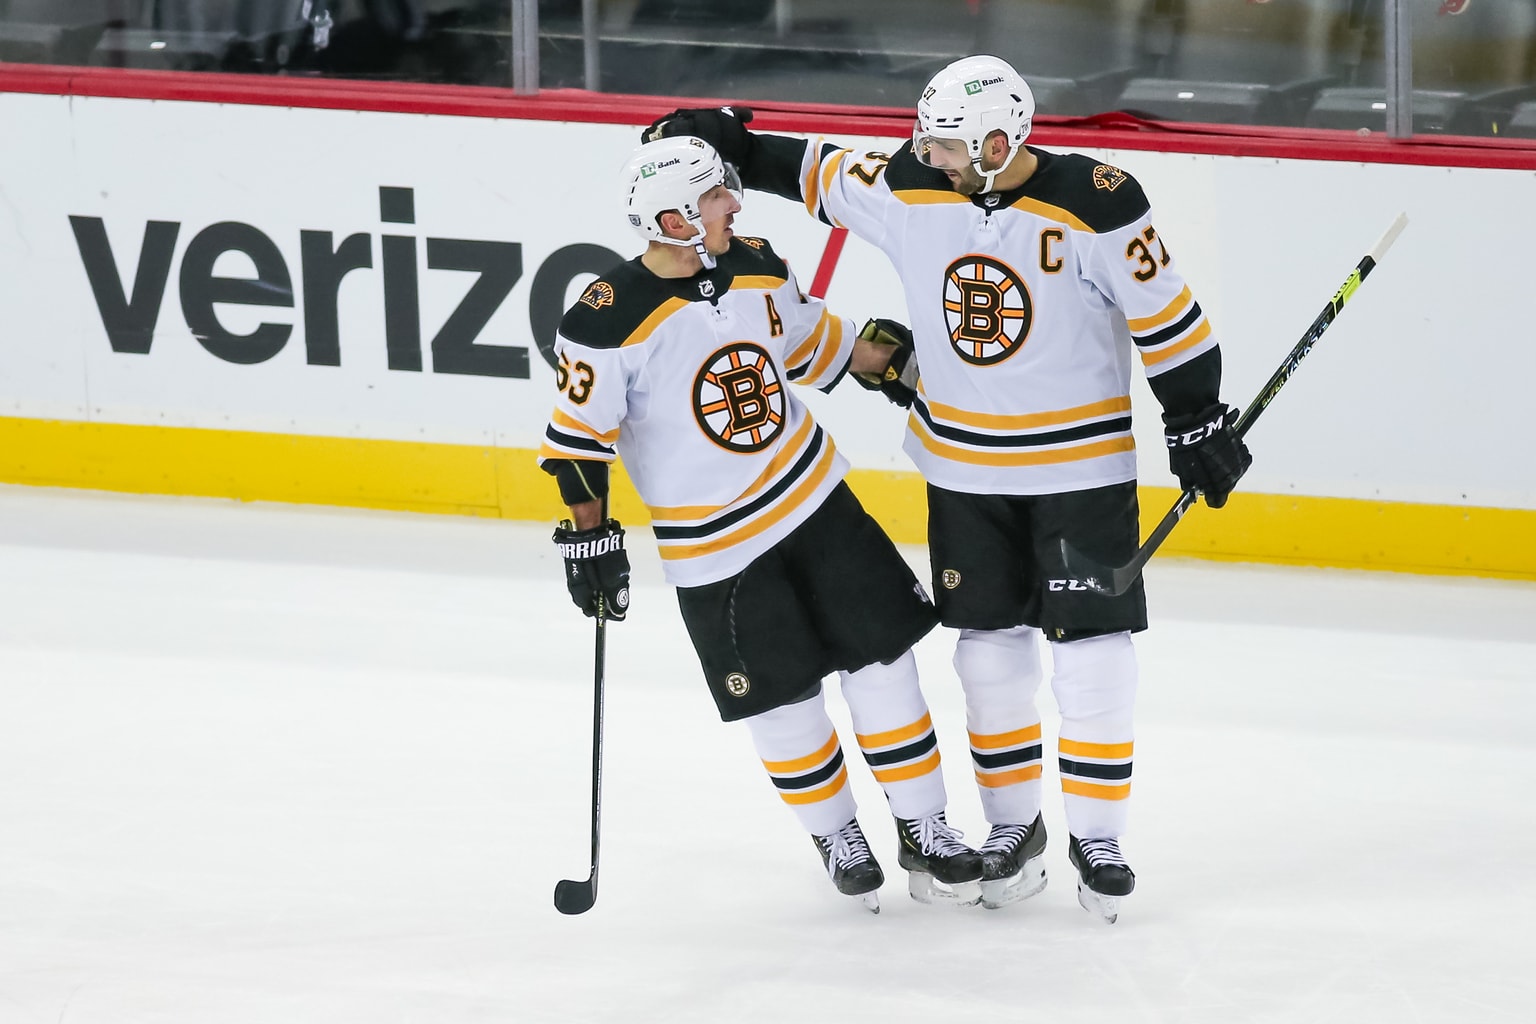 3 Takeaways From Bruins' 5-2 Win Over Wild